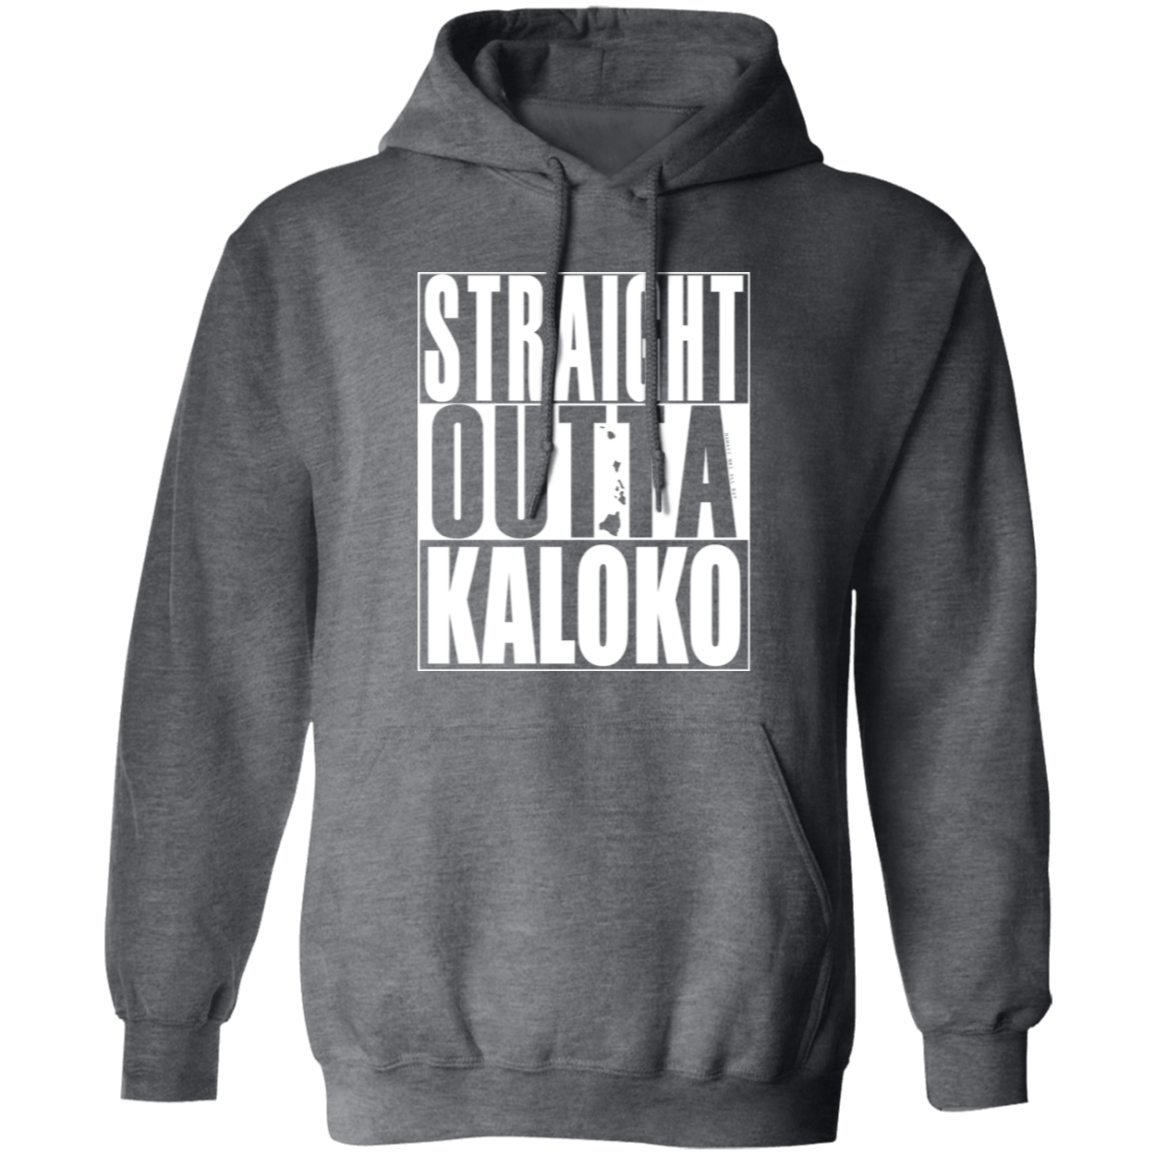 Straight Outta Kaloko (white ink) Pullover Hoodie